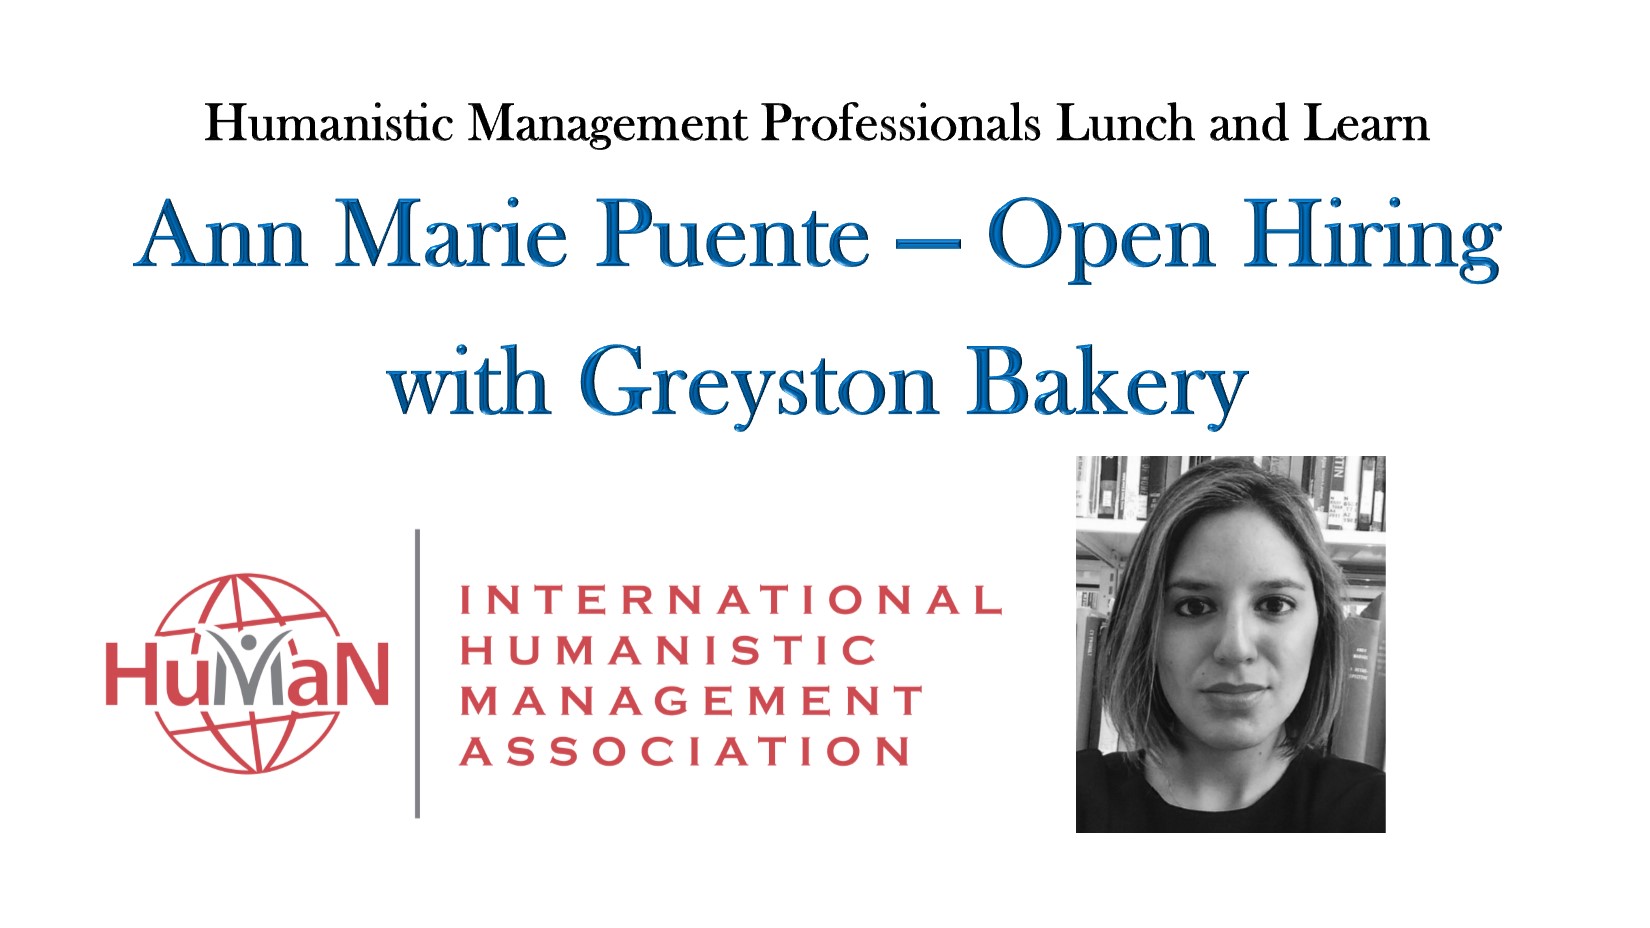 Video on Open Hiring – with Ann Marie Puente of Greyston Bakeries